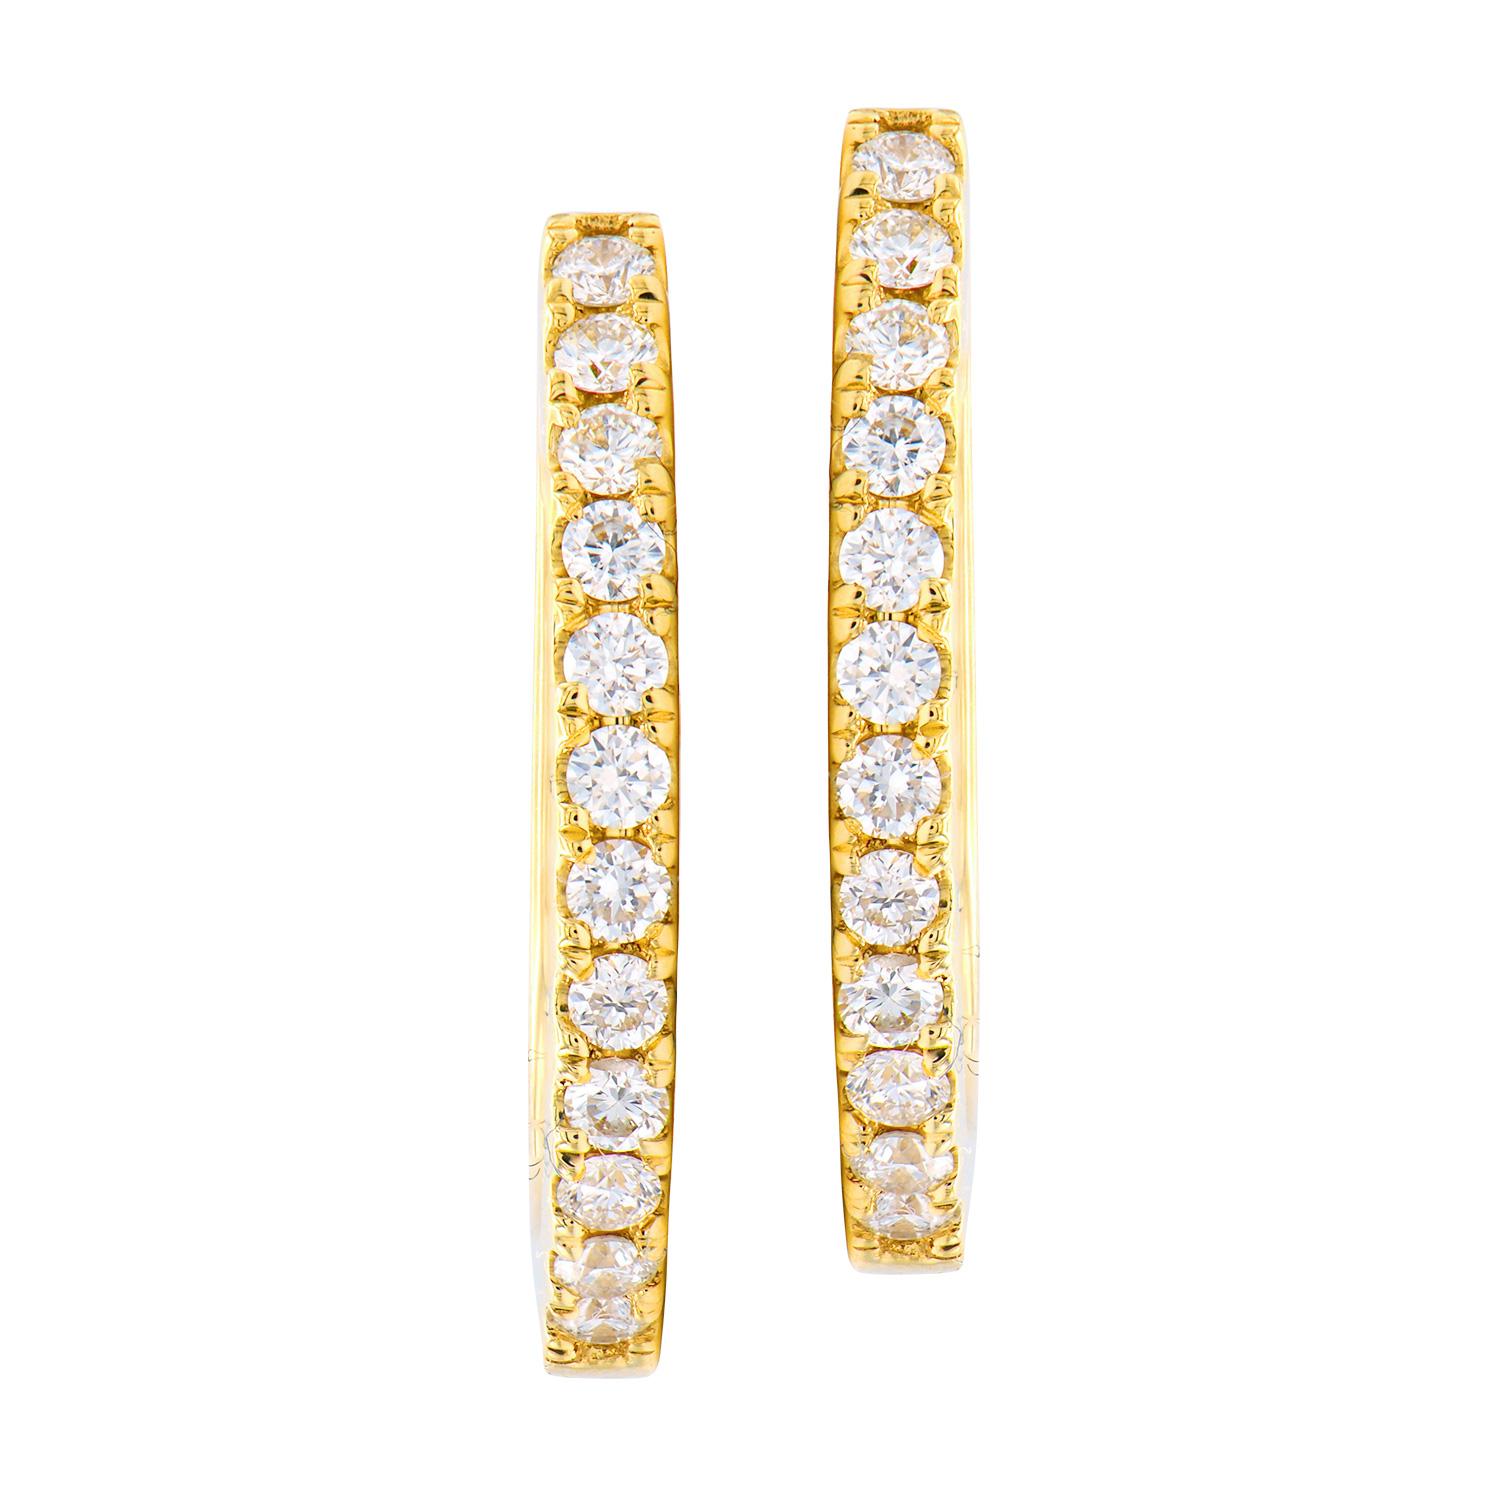 These hoops are classic and timeless. They are made from 2.4 grams of 14 karat yellow gold with a row of diamonds on the front side. The 24 round diamonds are SI, H color and total 0.26 carats. They are secured through the ear with a post that snaps